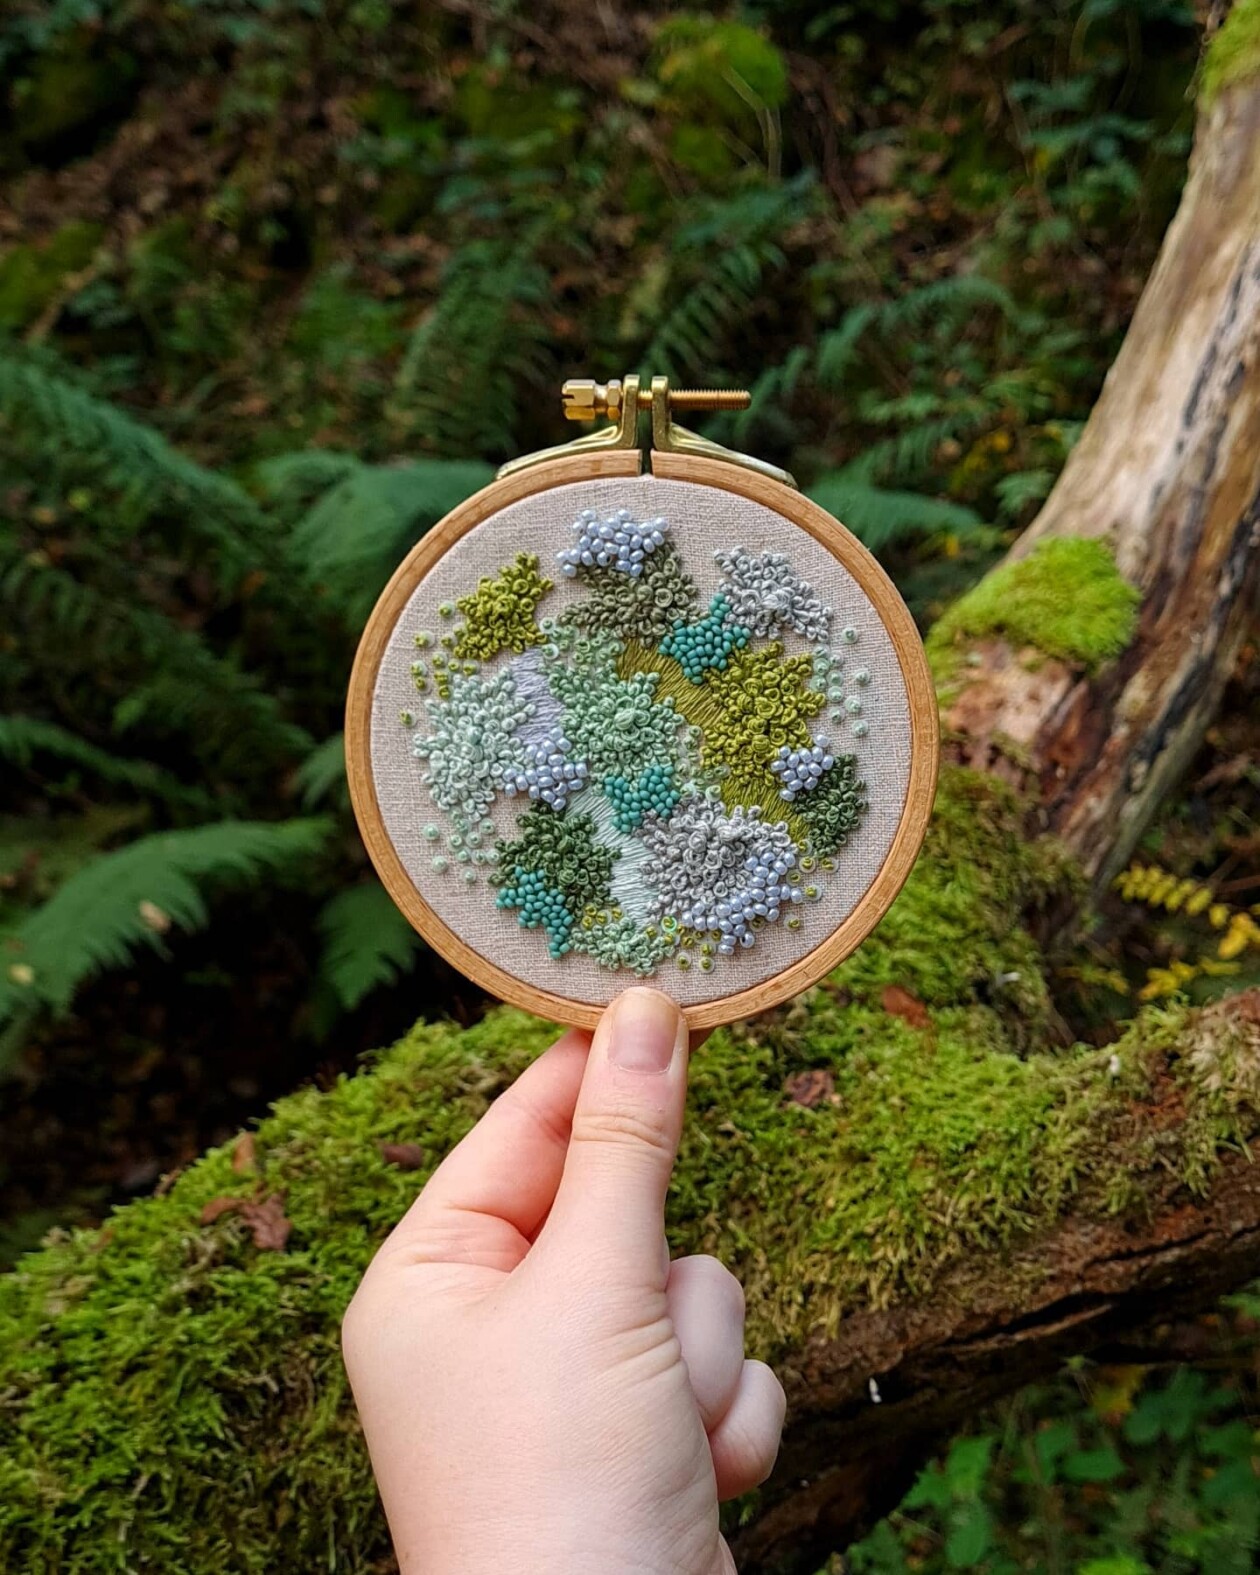 Marvelous Embroideries Inspired By Moss, Coral, And Lichen Forms By Hannah Kwasnycia (21)